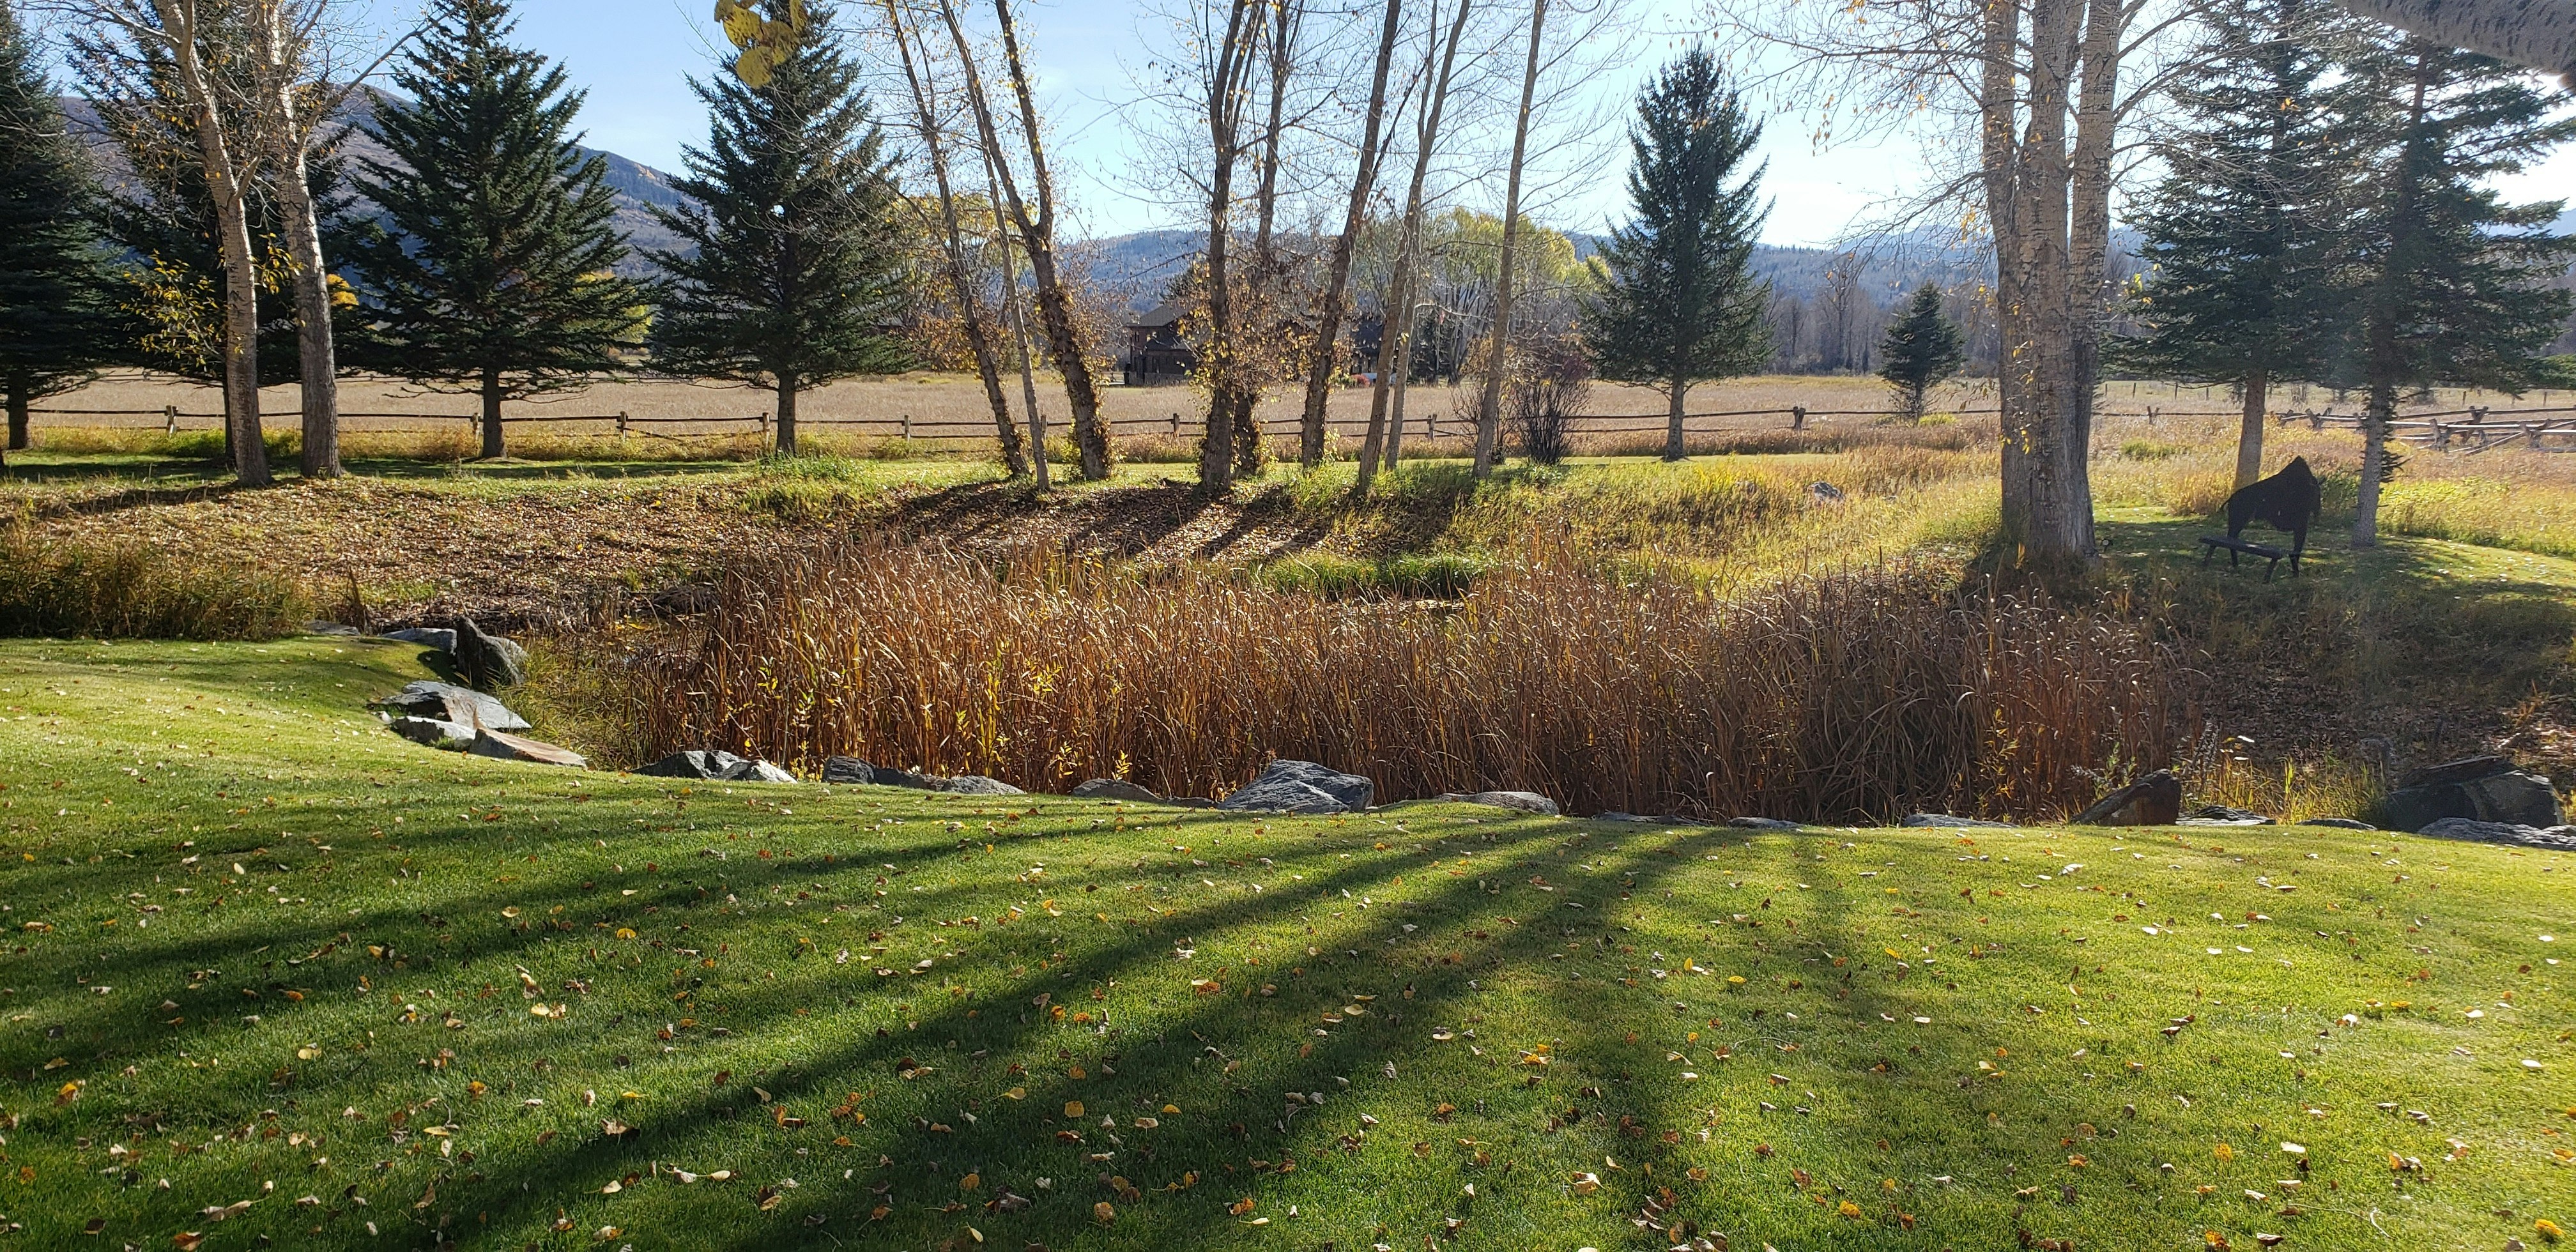 The pond has beautiful flowers in the summer, and golden brown grasses and grasses in the fall.